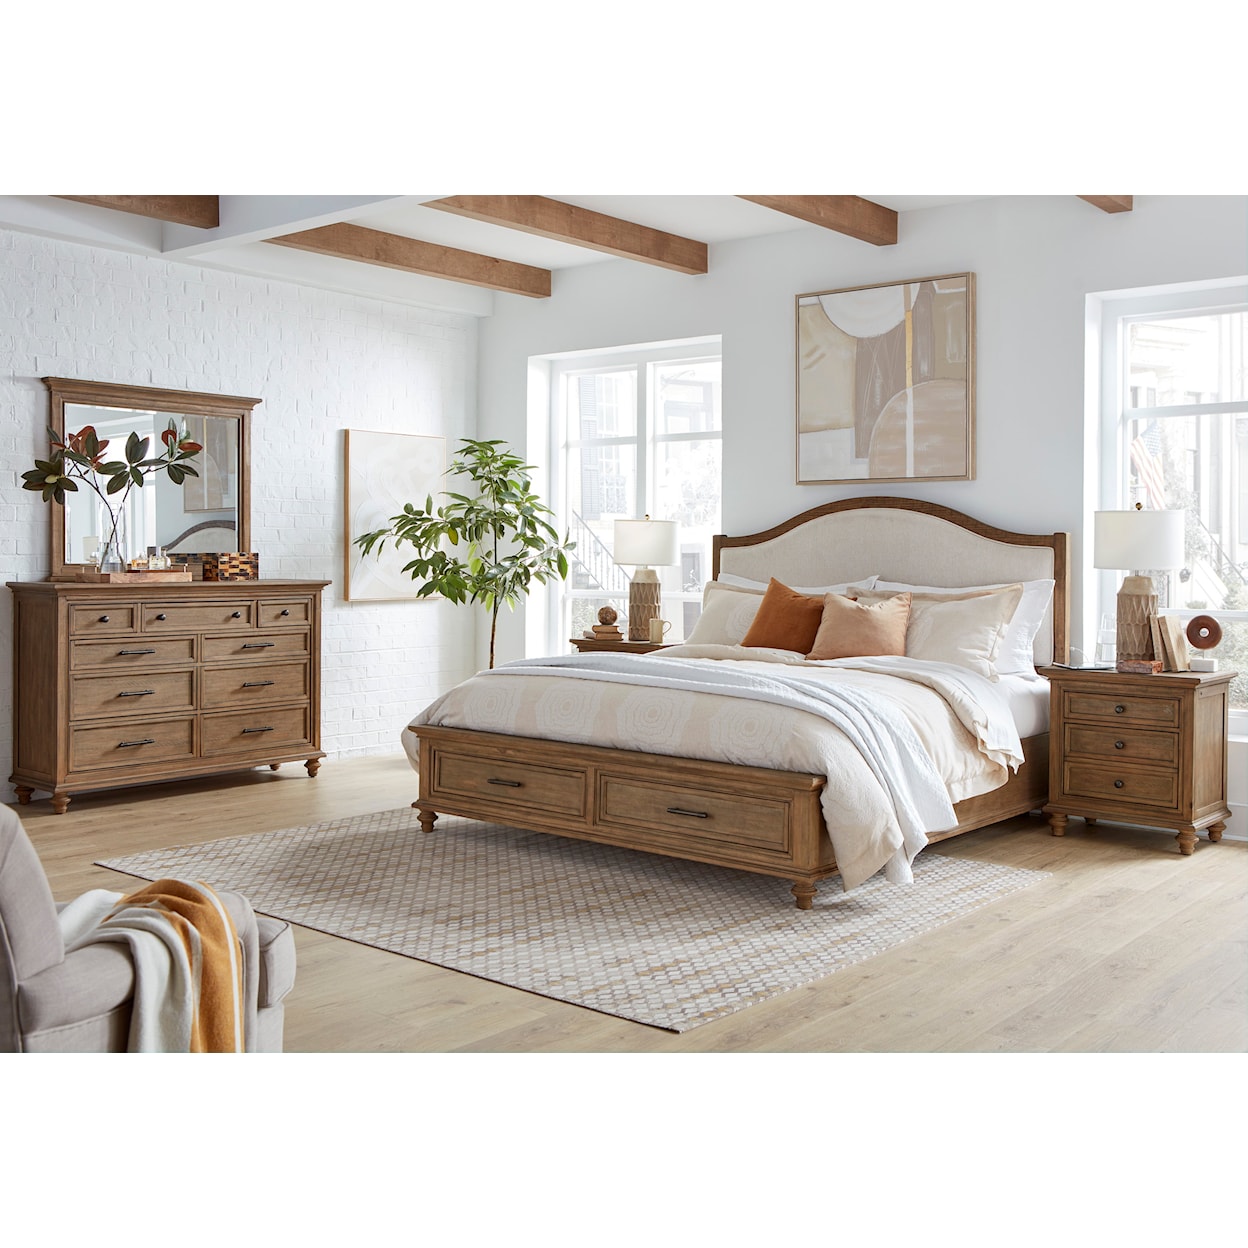 Aspenhome Hensley California King Arched Panel Bed